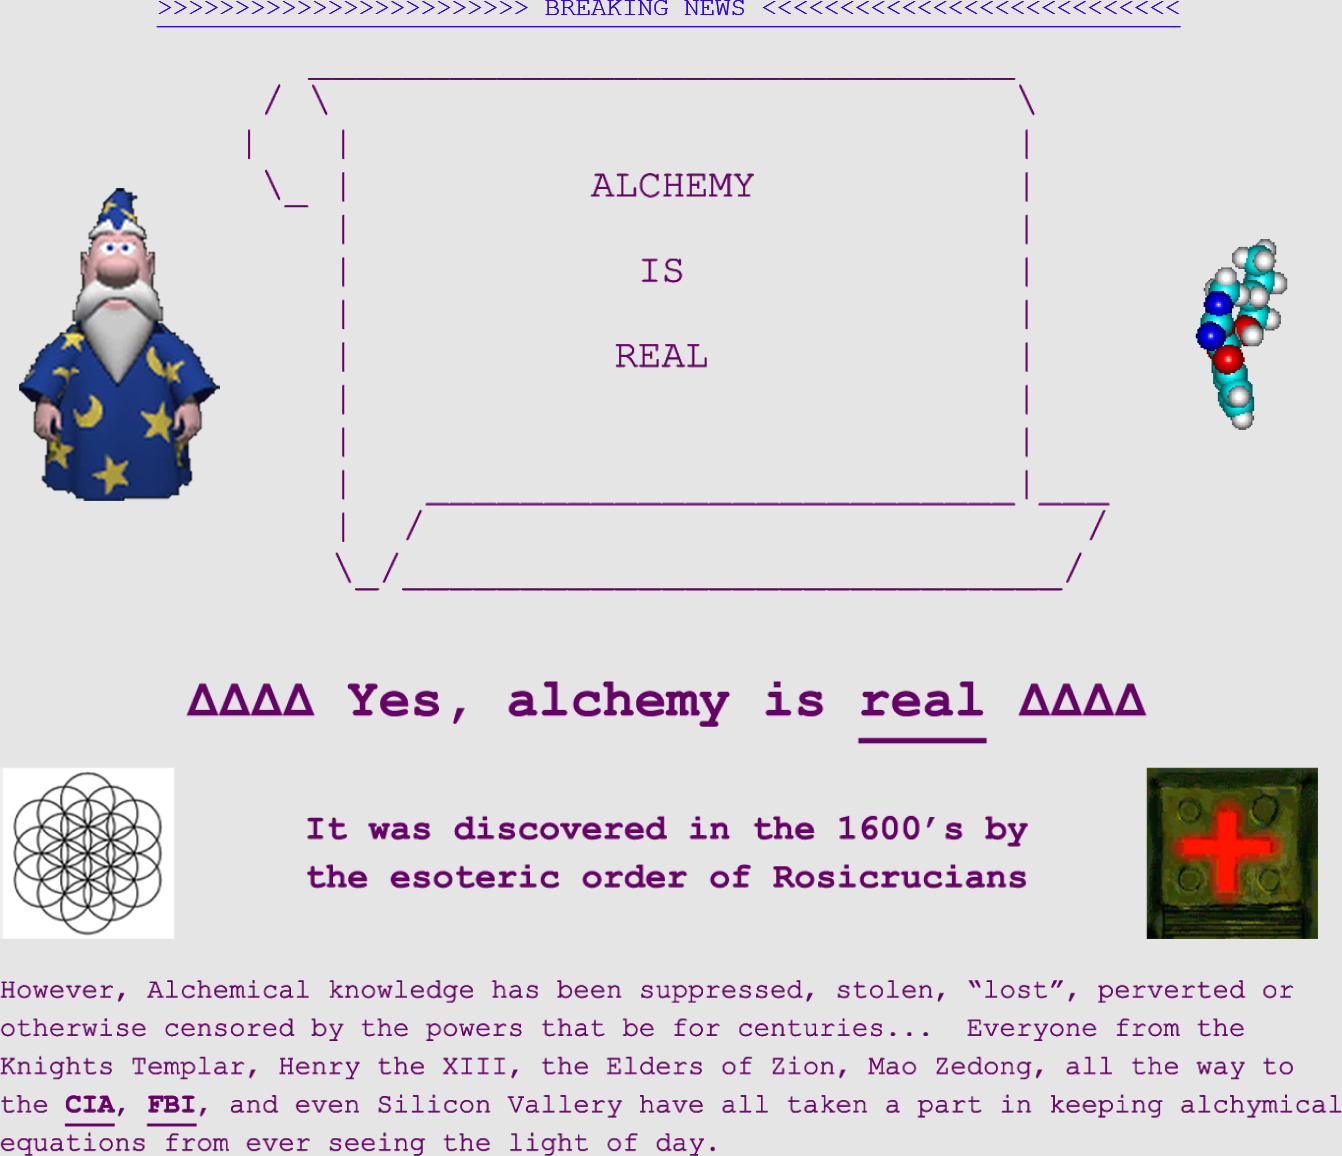 Alchemy is real!